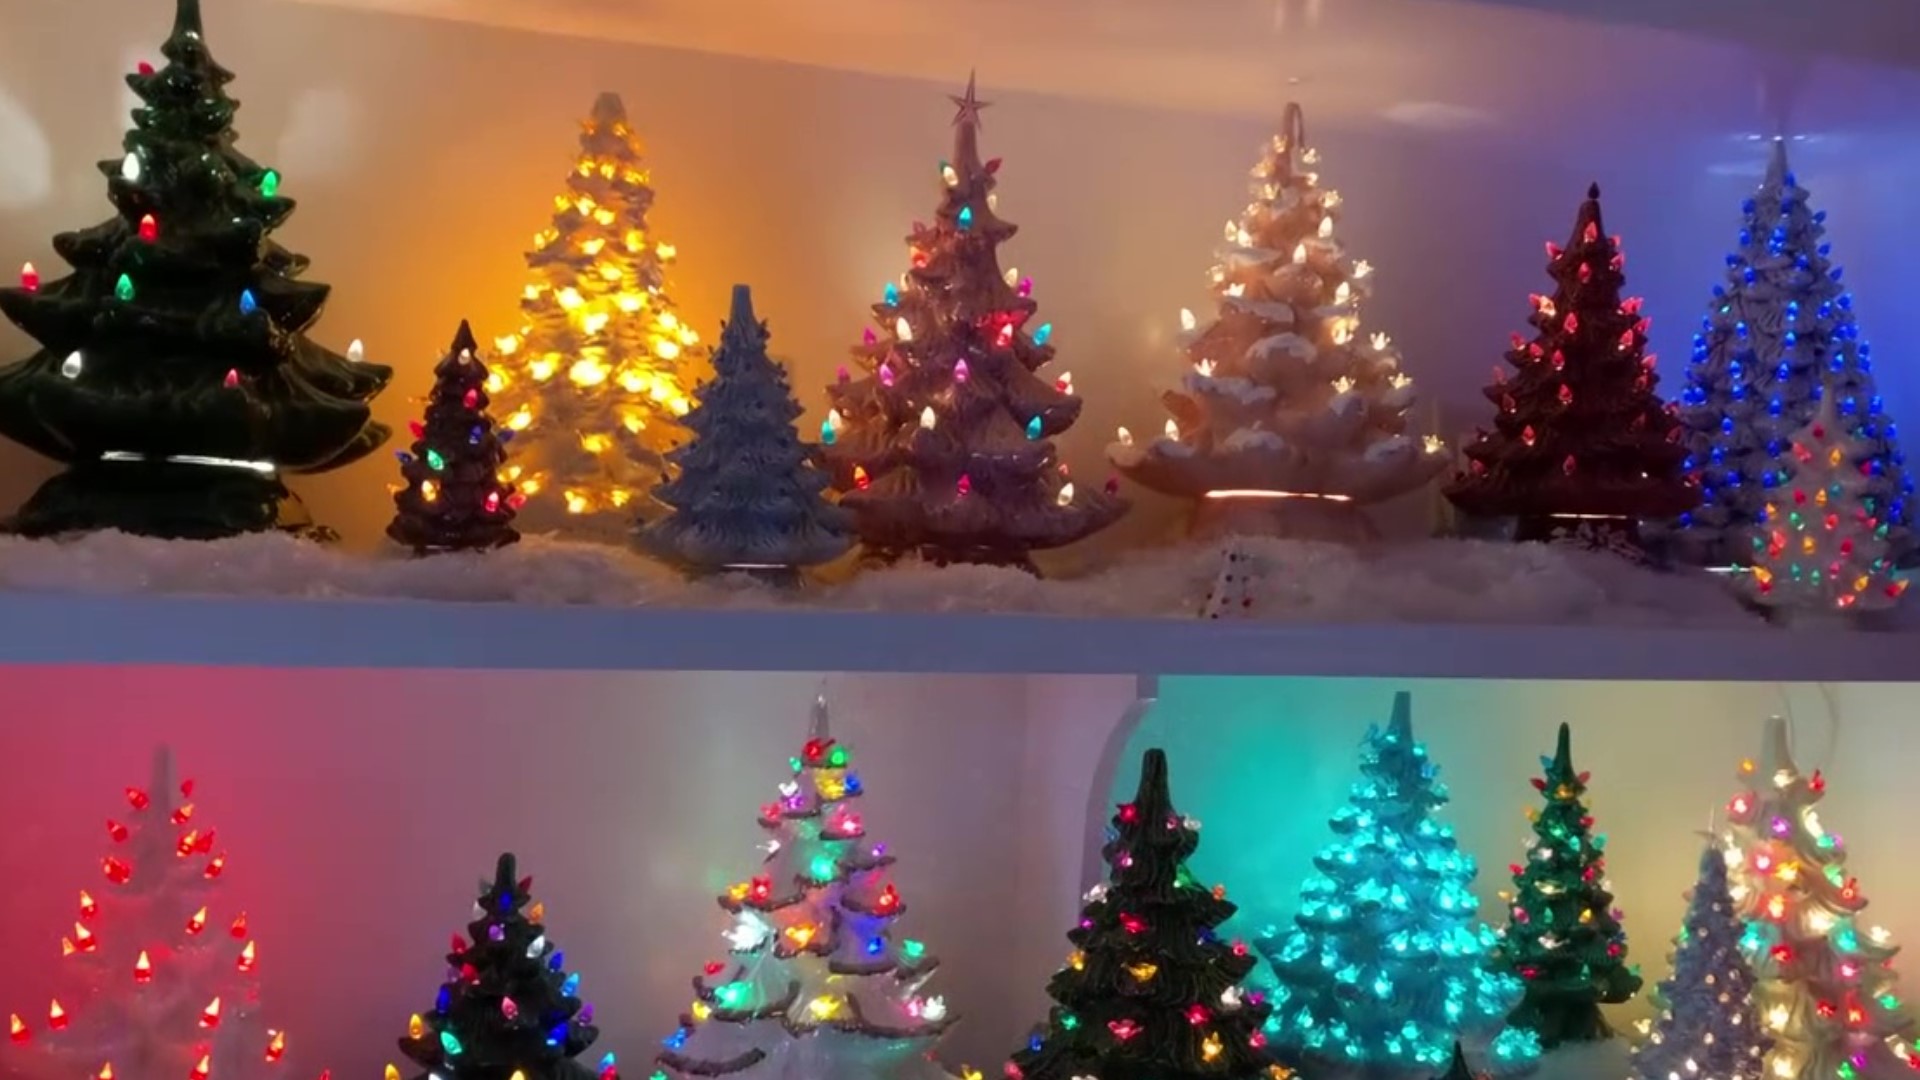 For many folks, old fashioned ceramic trees bring back fond memories of Christmases past.